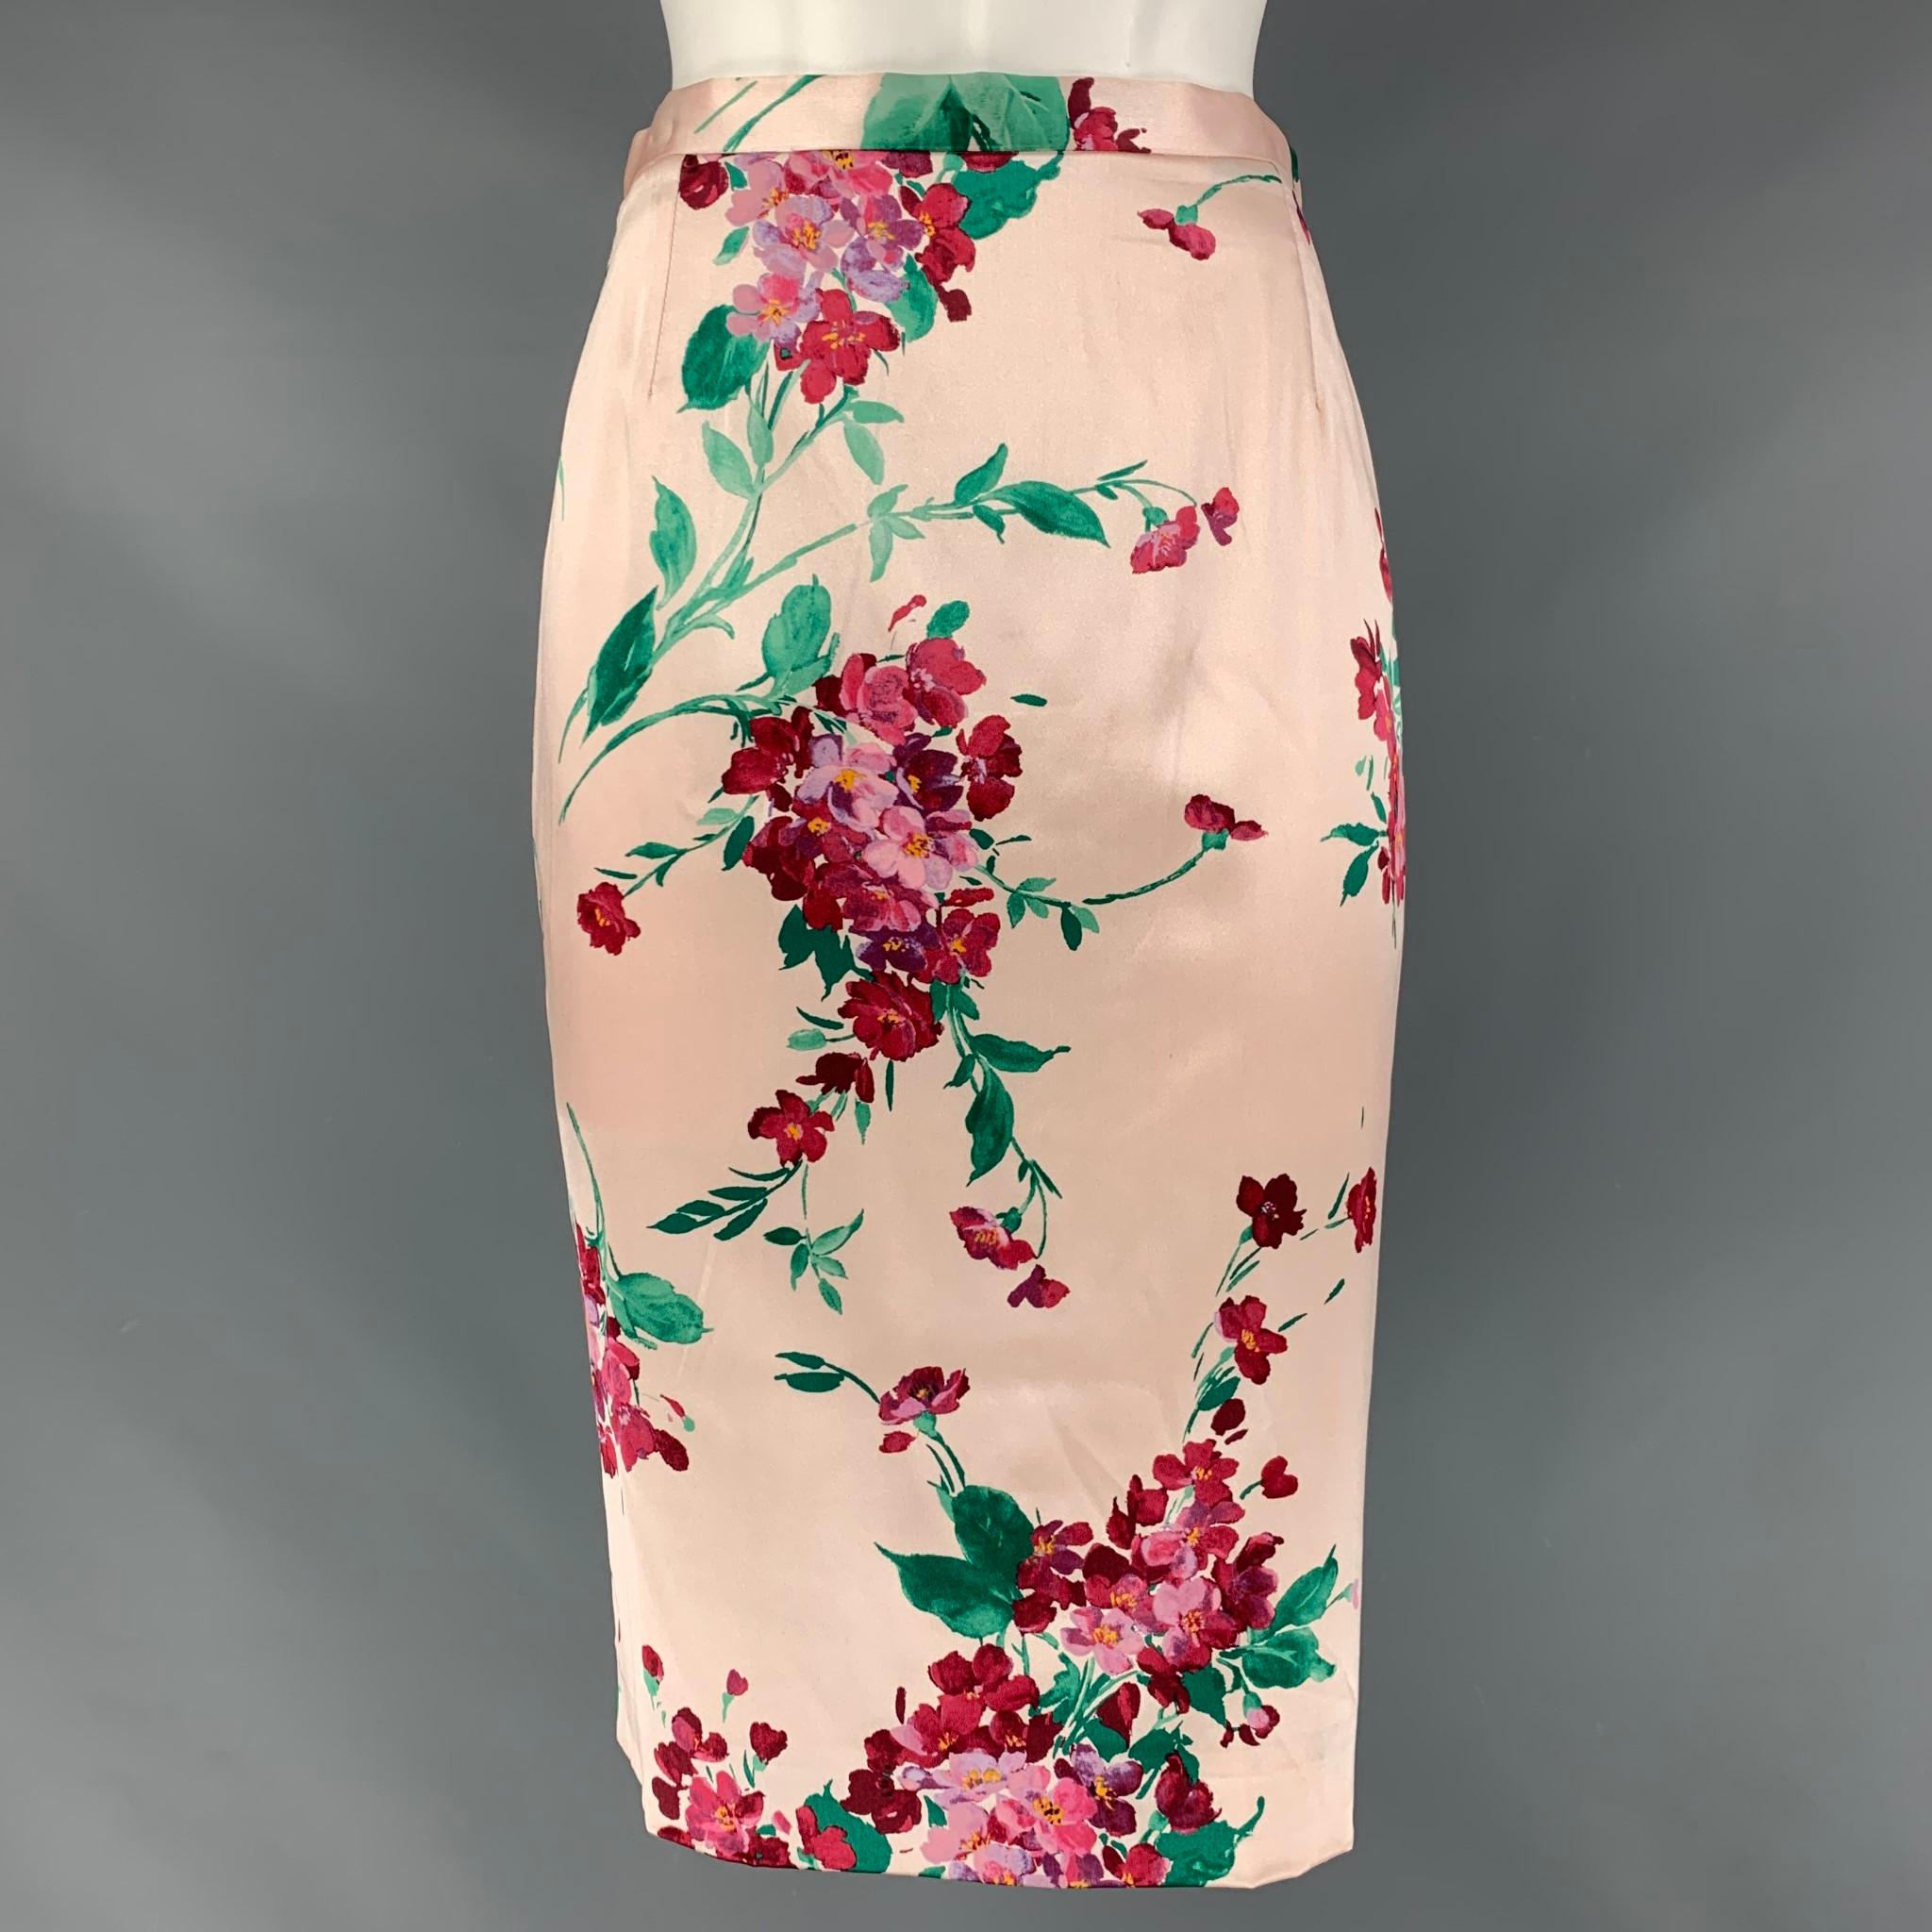 DOLCE & GABBANA pencil skirt comes in a blush and burgundy silk and spandex floral sateen featuring a button at back and a center back invisible closure.

Excellent Pre-Owned Condition.
Marked: 42

Measurements:

Waist: 27 in.
Hip: 34 in.
Length: 25